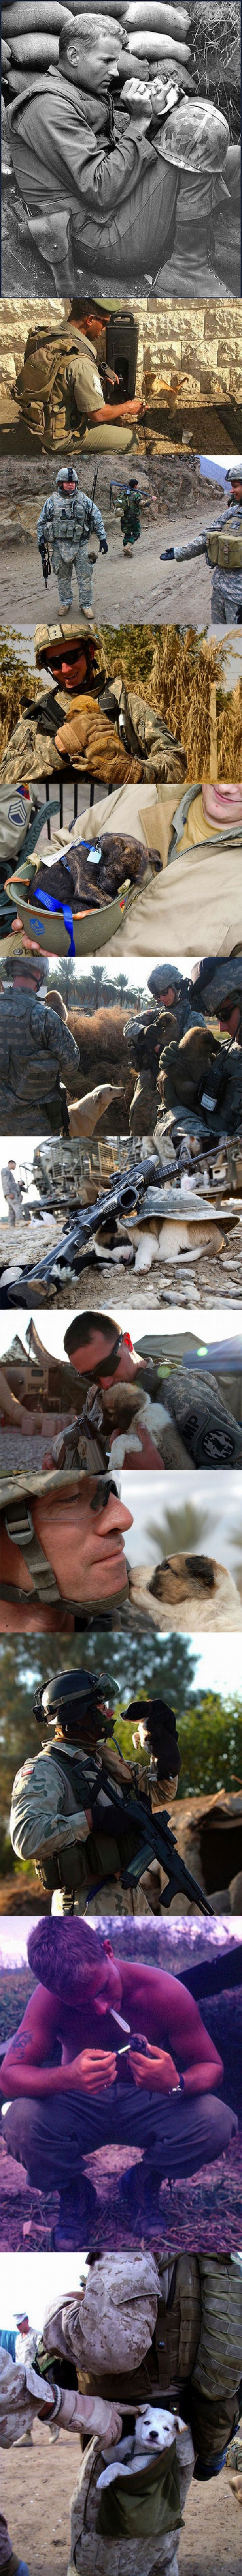 Combat Boots + Puppy Paws...Even In Times Of War These Men Are Human